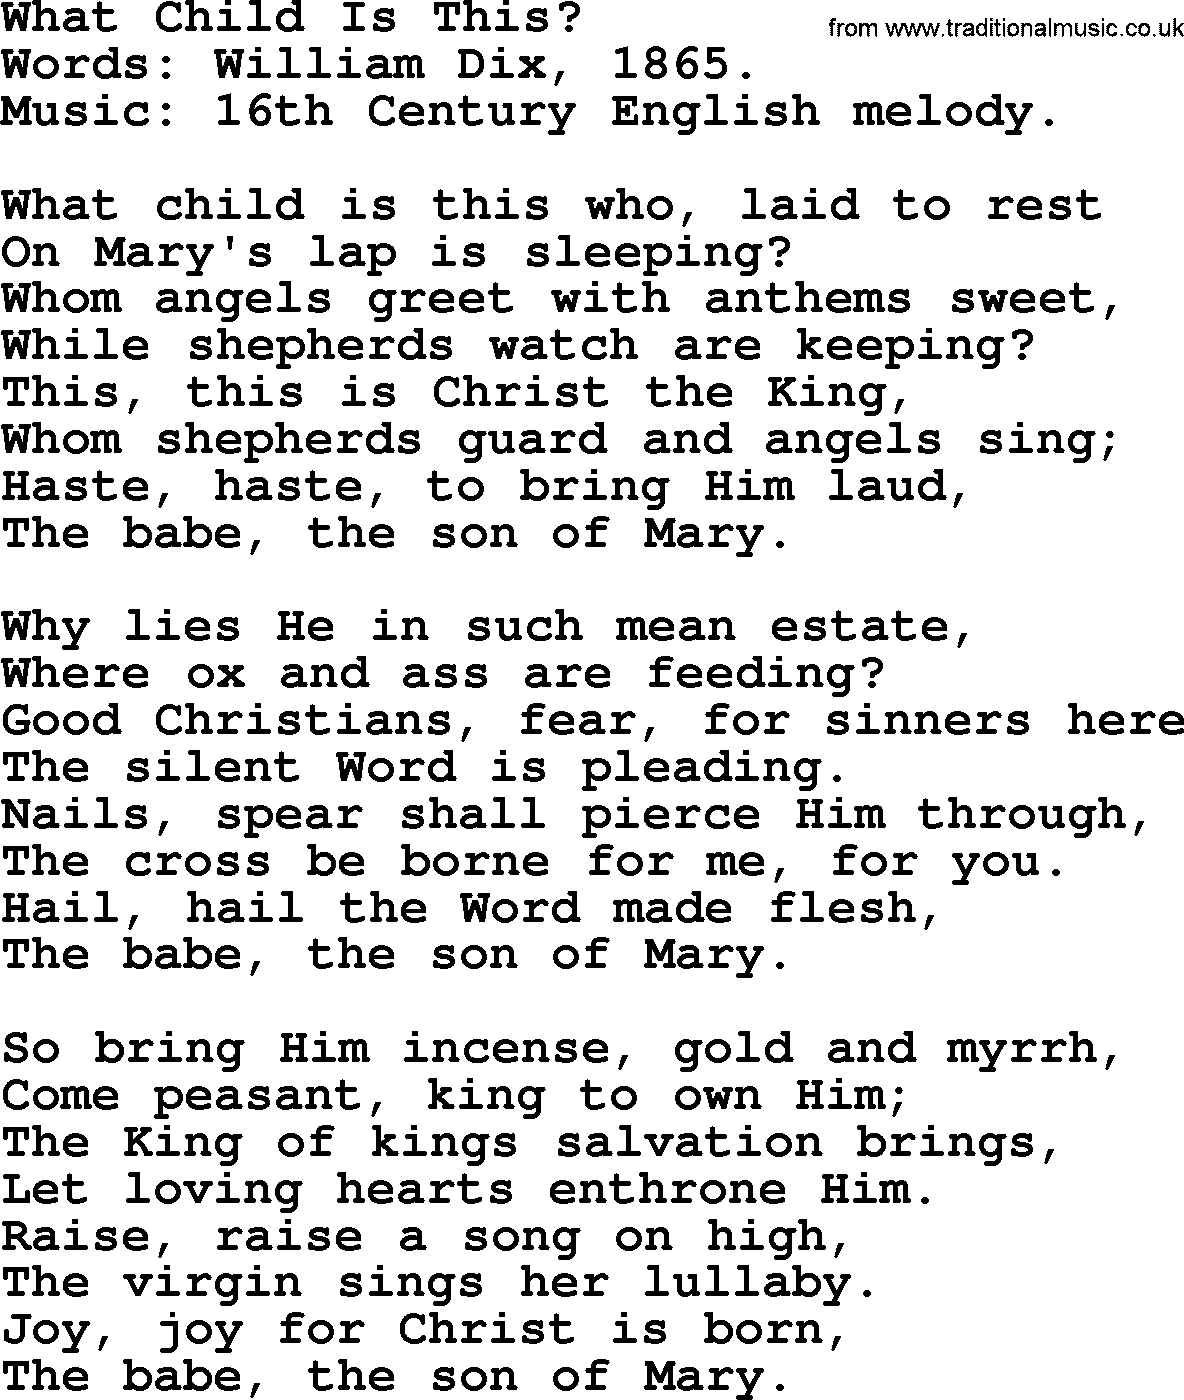 Christmas Hymns, Carols and Songs, title: What Child Is This - complete lyrics, and PDF